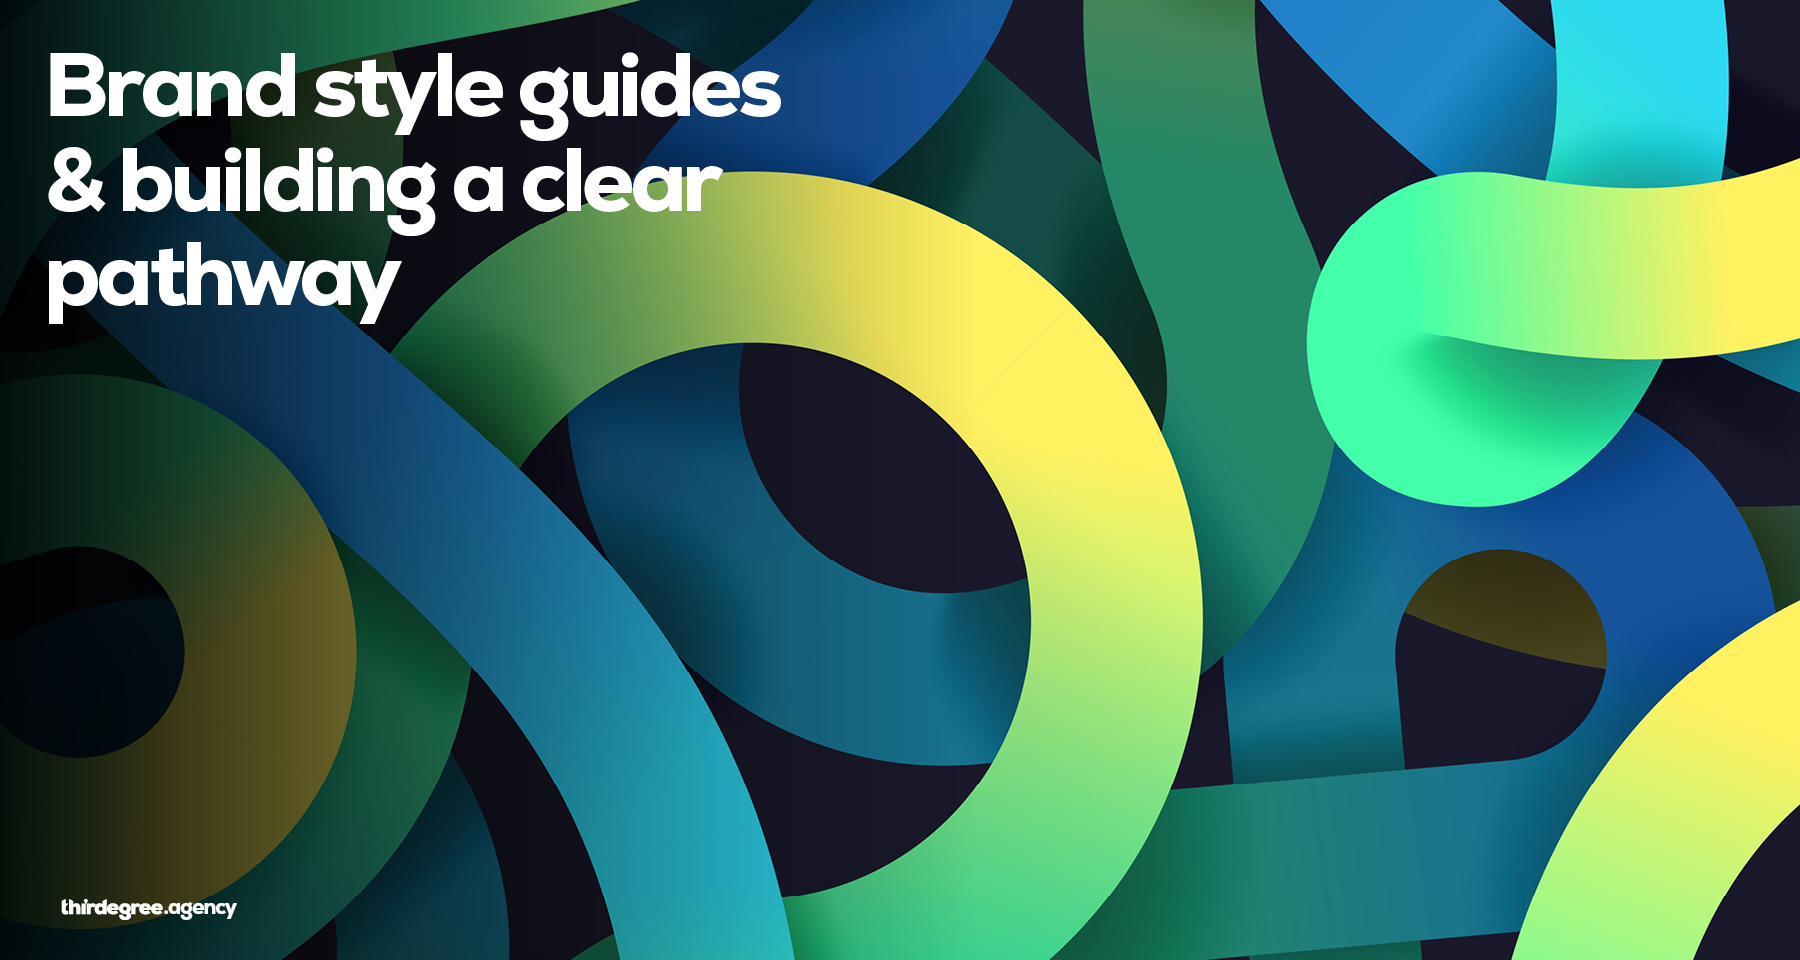 Brand style guides & building a clear pathway